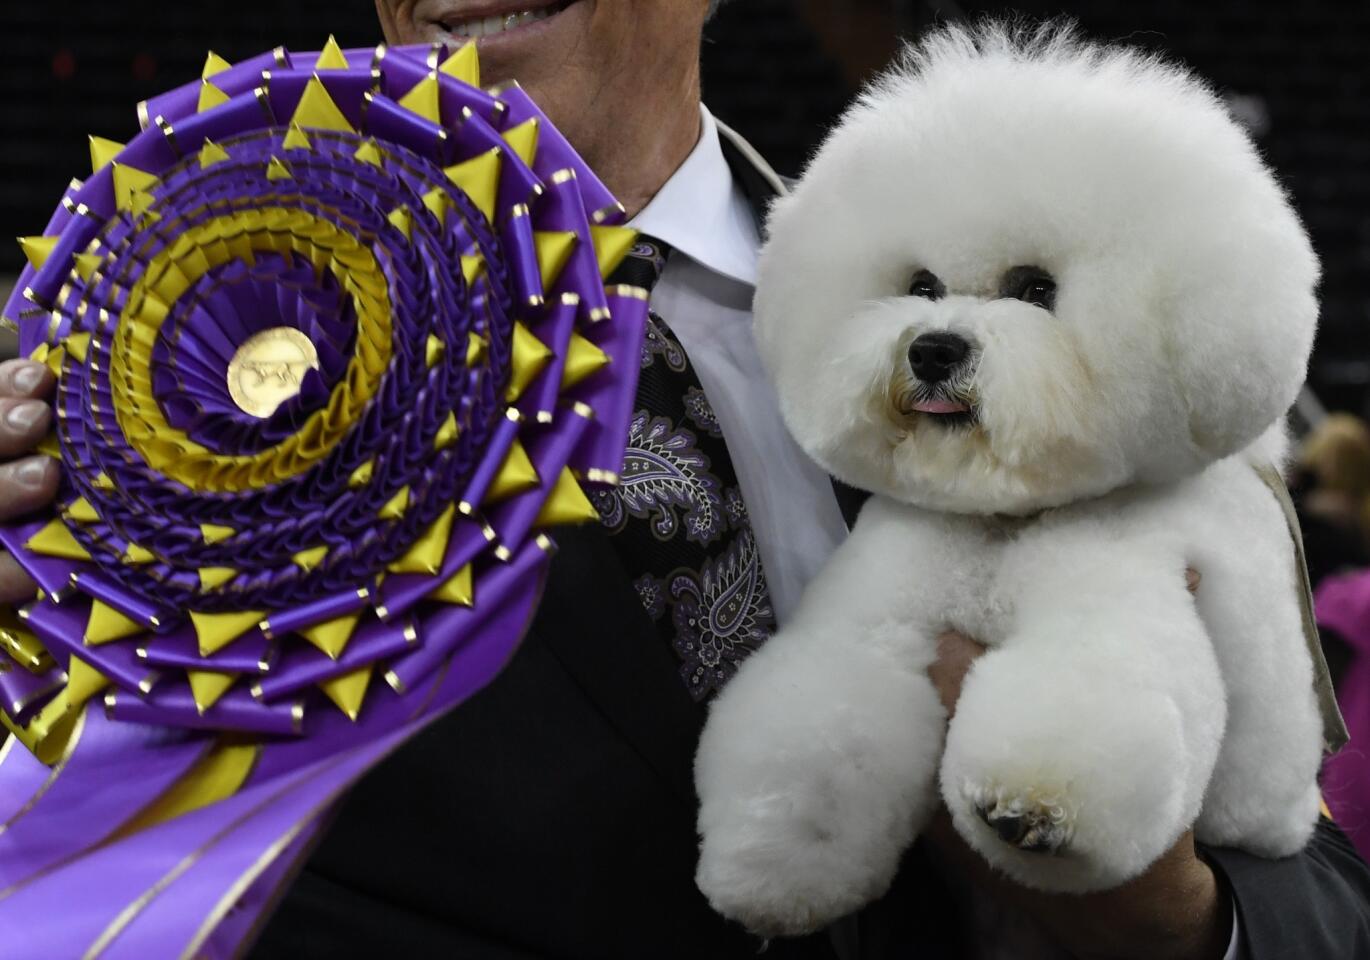 Flynn the bichon frise, with handler Bill McFadden, poses after winning Best in Show at the Westminster Kennel Club 142nd Annual Dog Show on Feb. 13, 2018, at Madison Square Garden in New York.